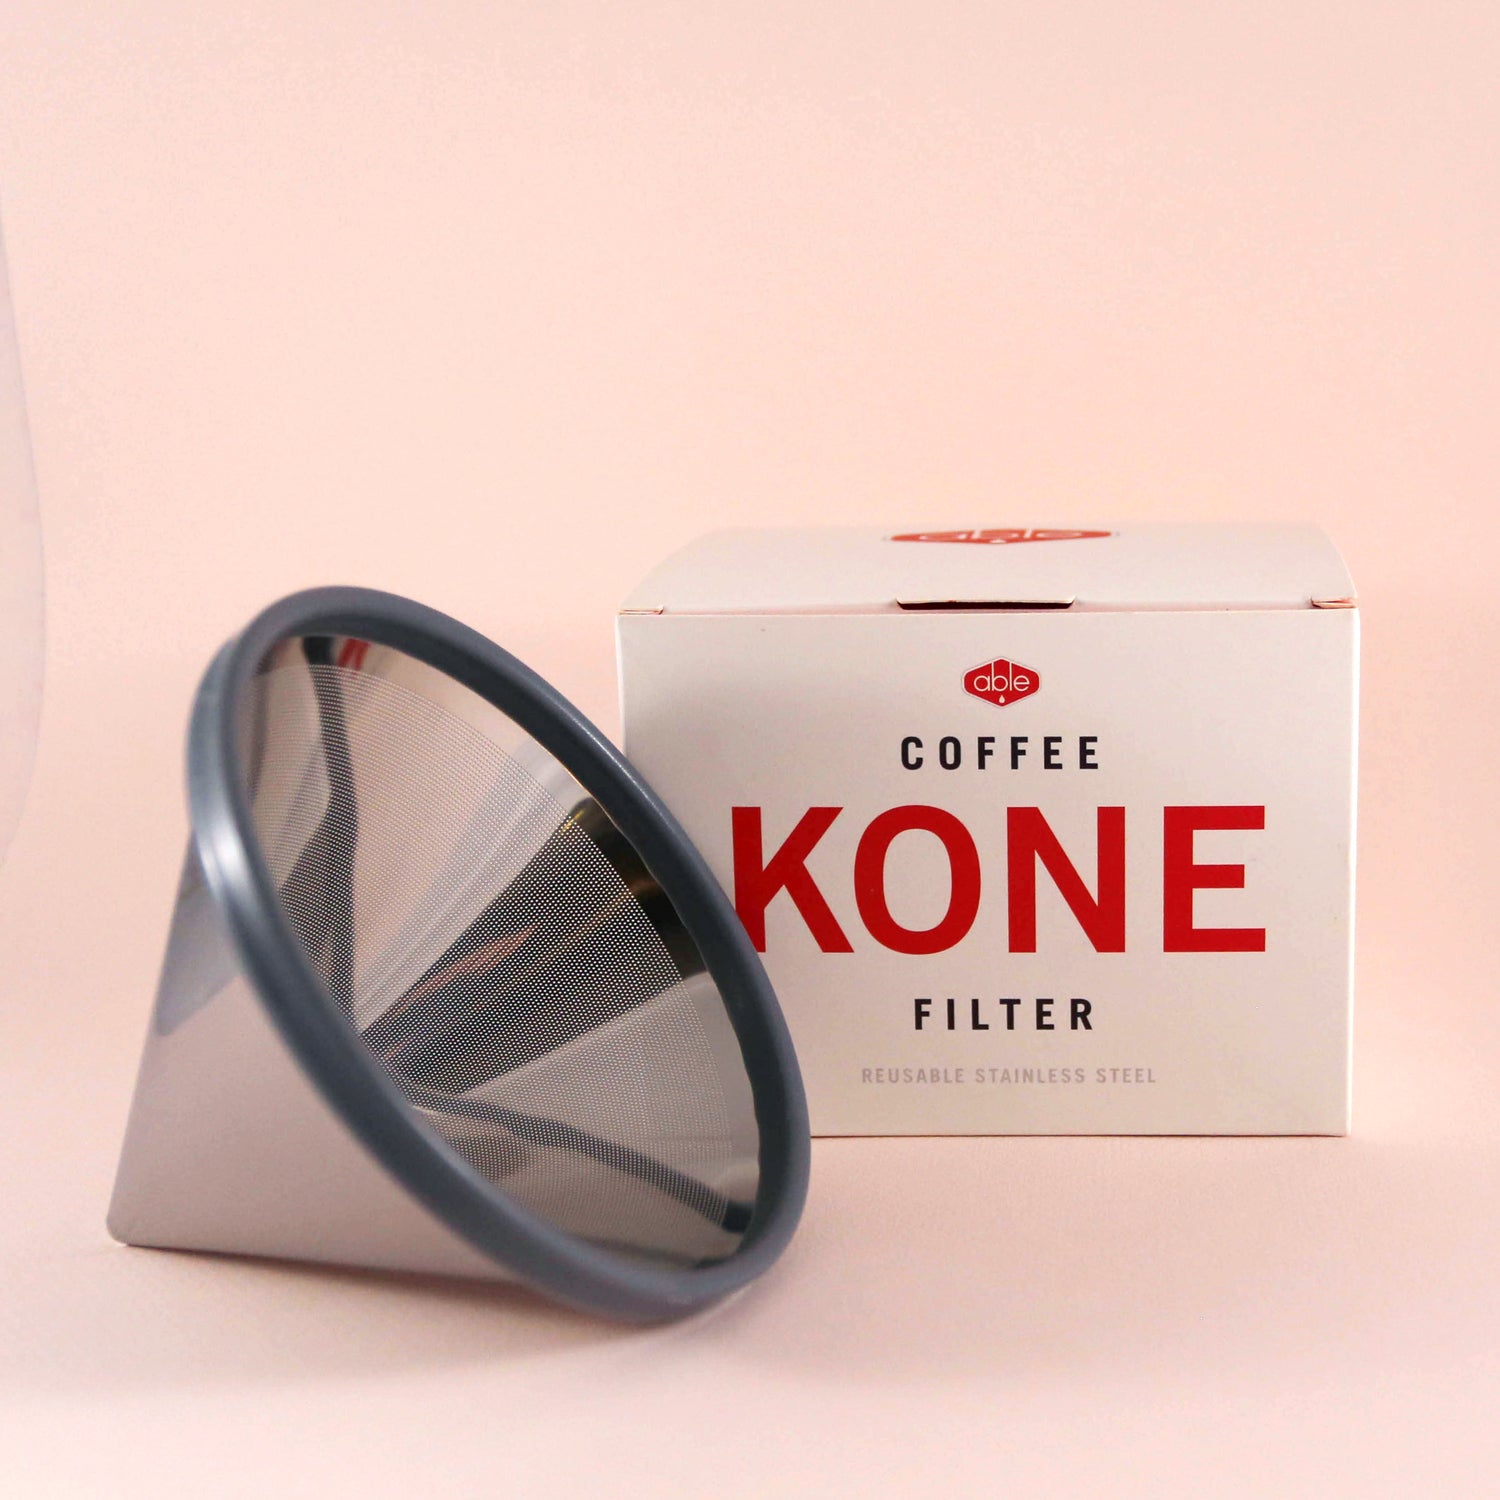 A Tandem Coffee Roasters Able Coffee Kone stainless steel reusable coffee filter next to its packaging box on a light pink background. The box displays the product name prominently.